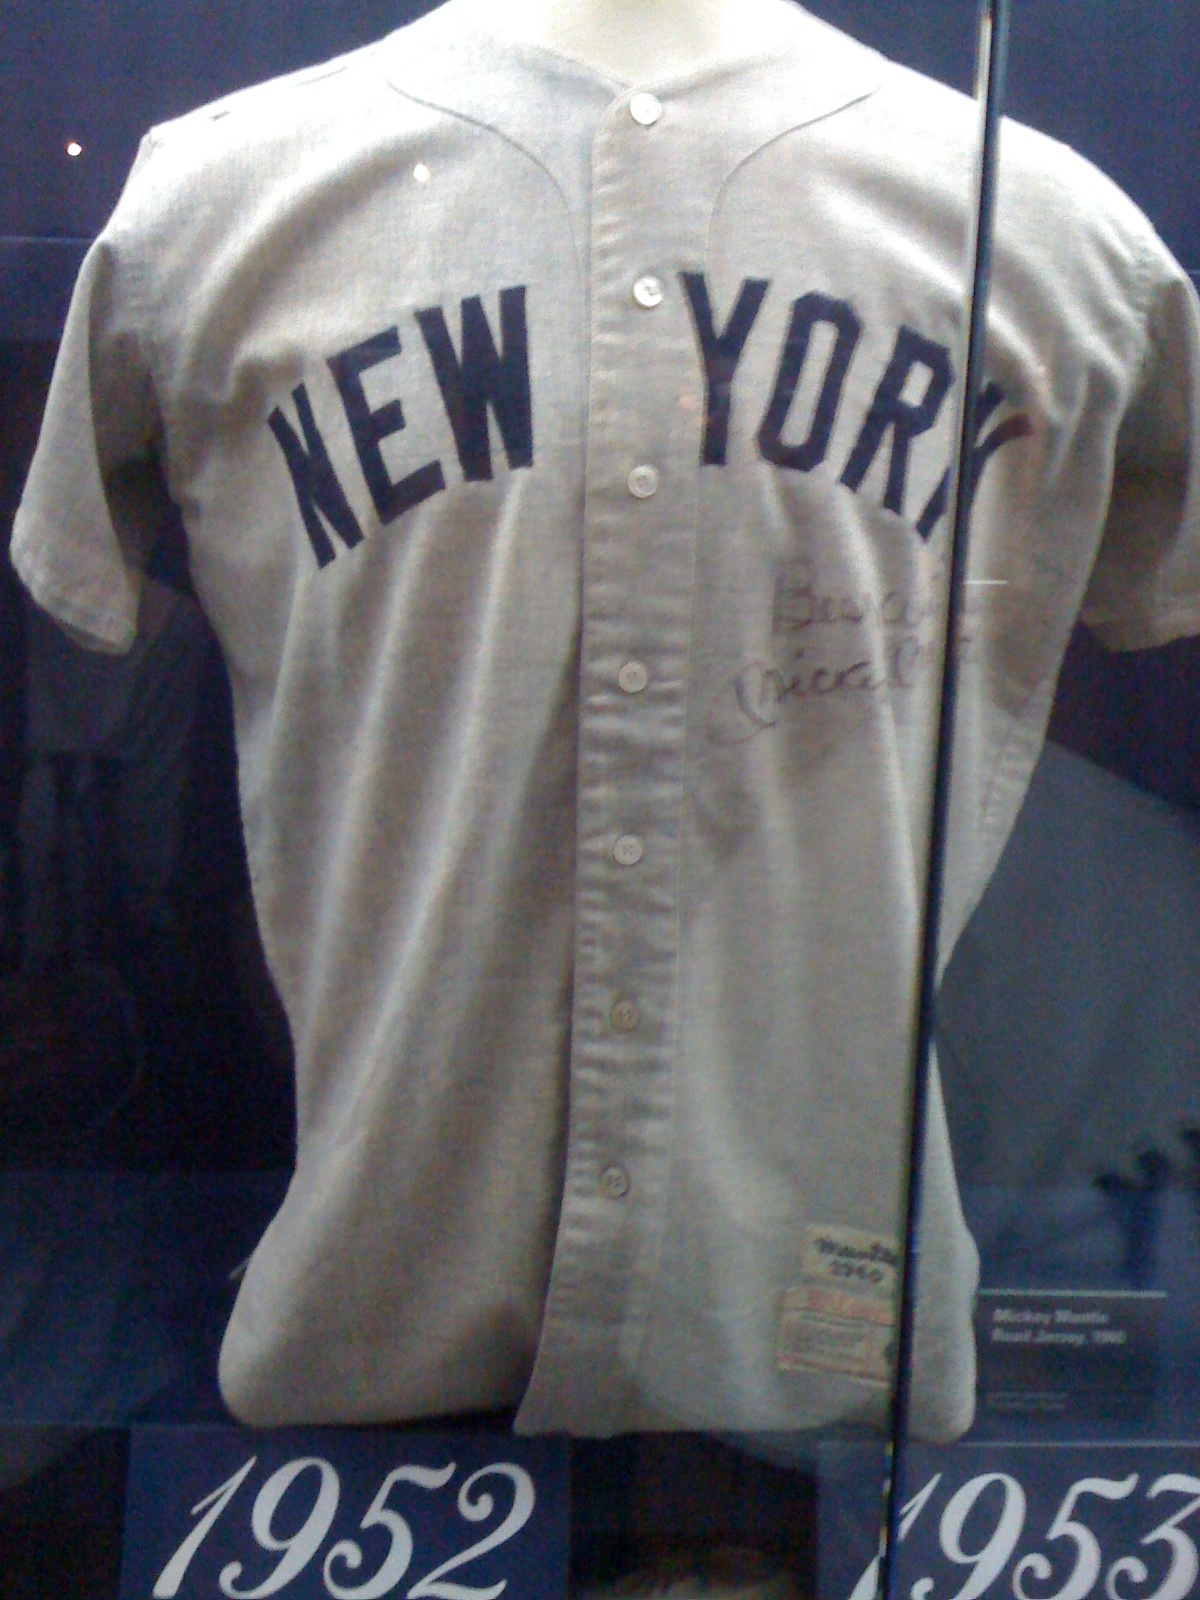 Mickey Mantle's Jersey